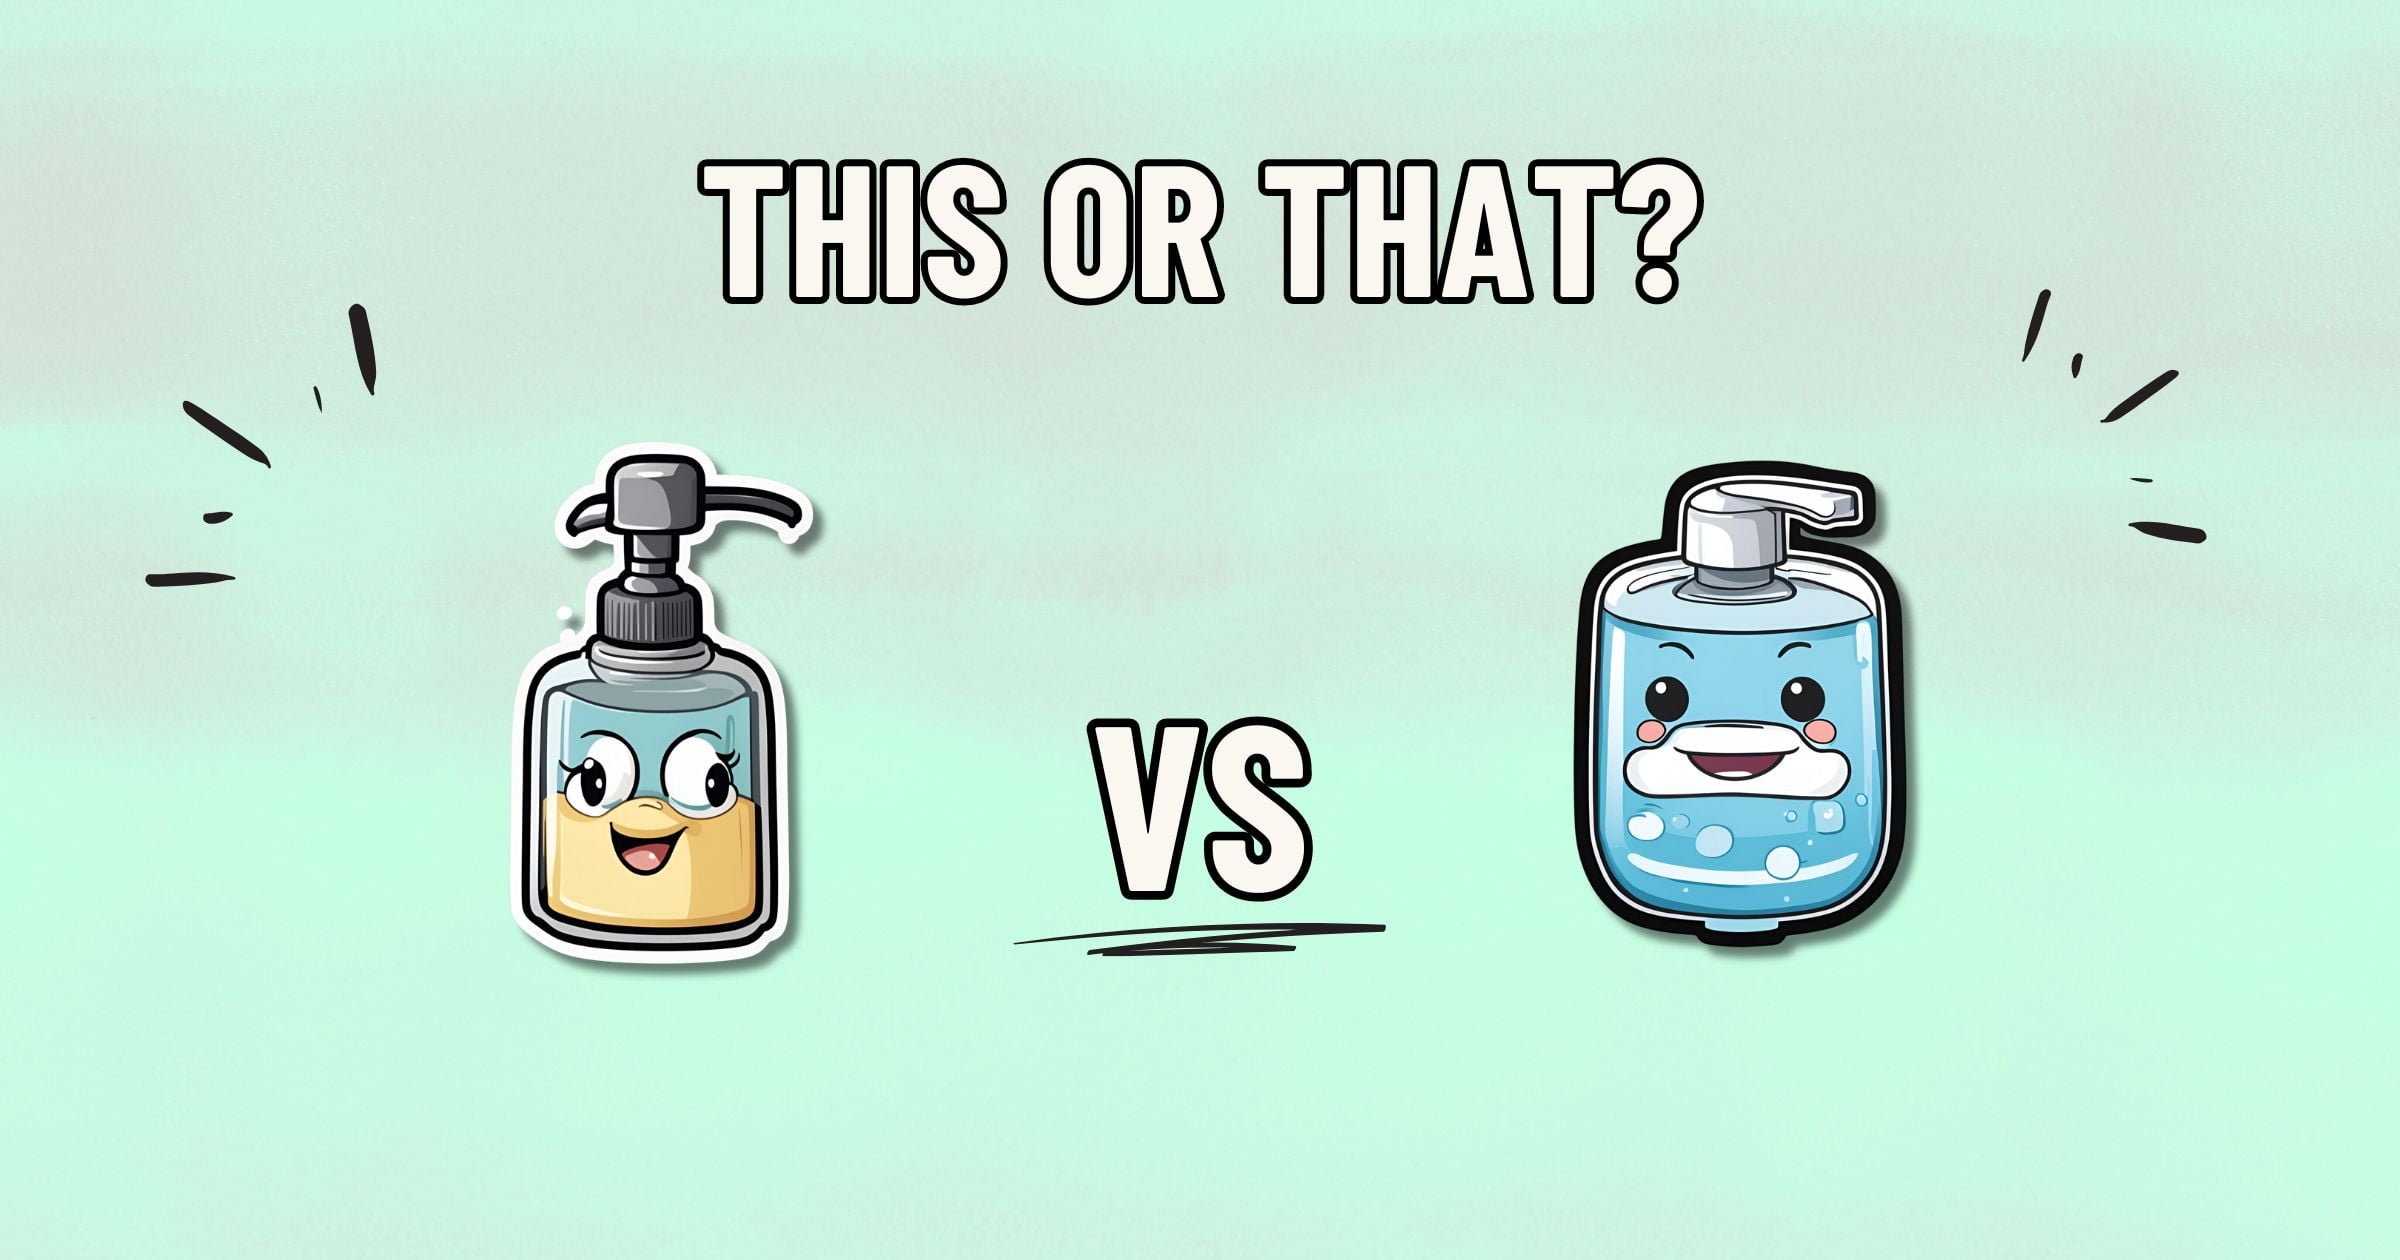 An image depicting a comparison between two cartoon-style soap dispensers. The left dispenser is yellow with a happy face, while the right one is blue with a smiling face. "THIS OR THAT?" is written at the top, and "VS" is in the middle below the dispensers. Which one will make you feel healthier?